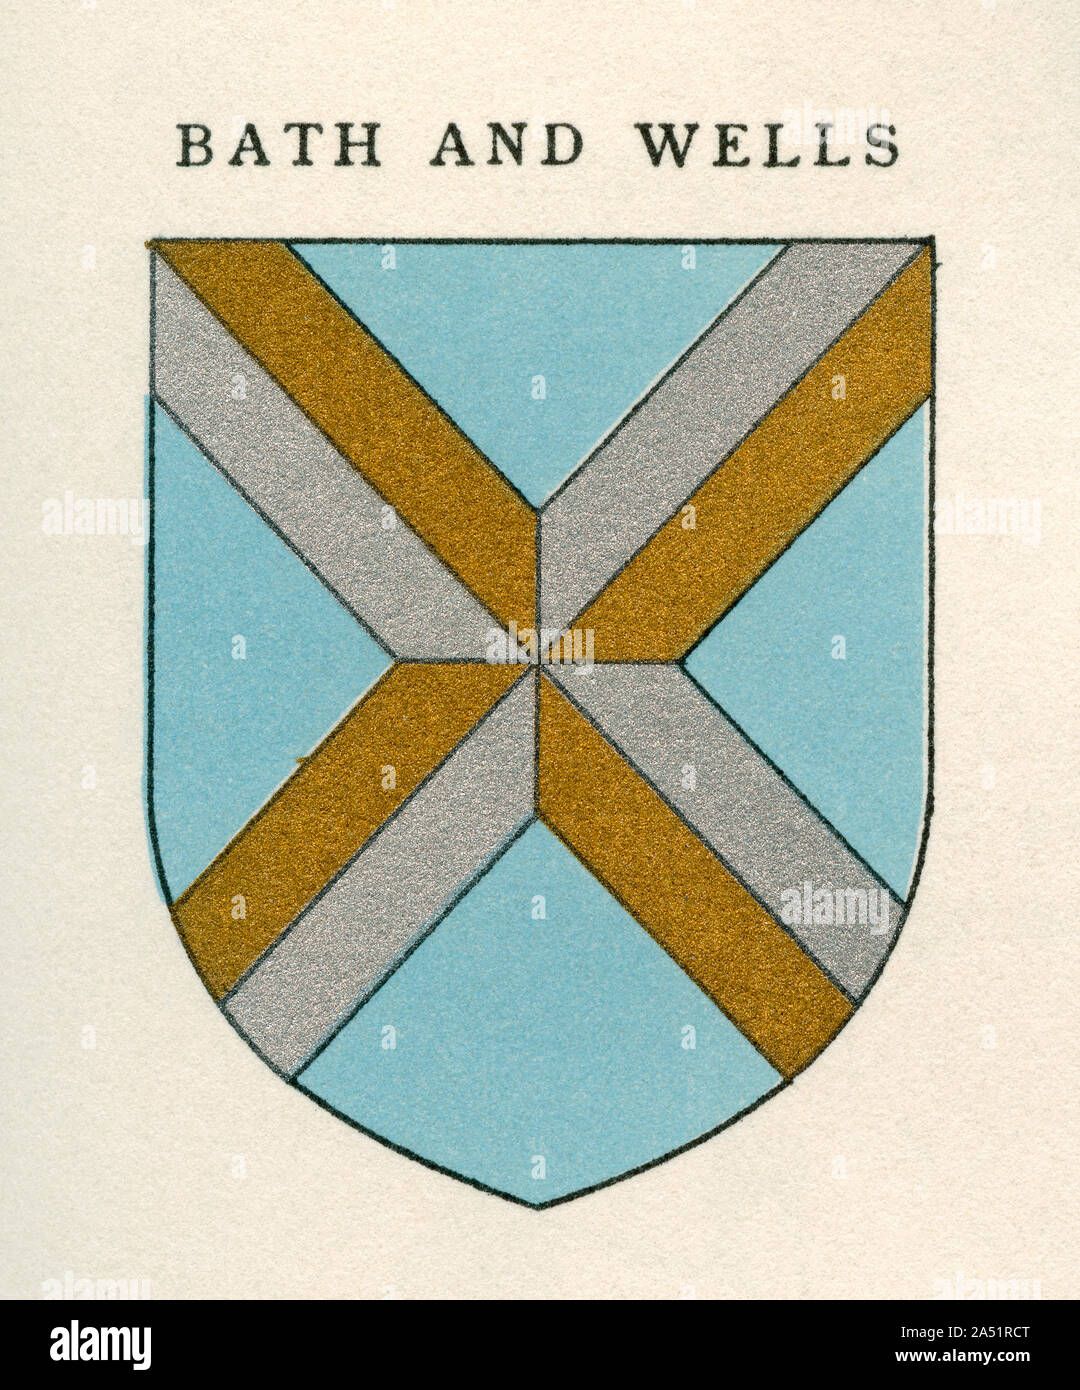 Coat of arms of the Diocese of Bath and Wells.  From Cathedrals, published 1926. Stock Photo